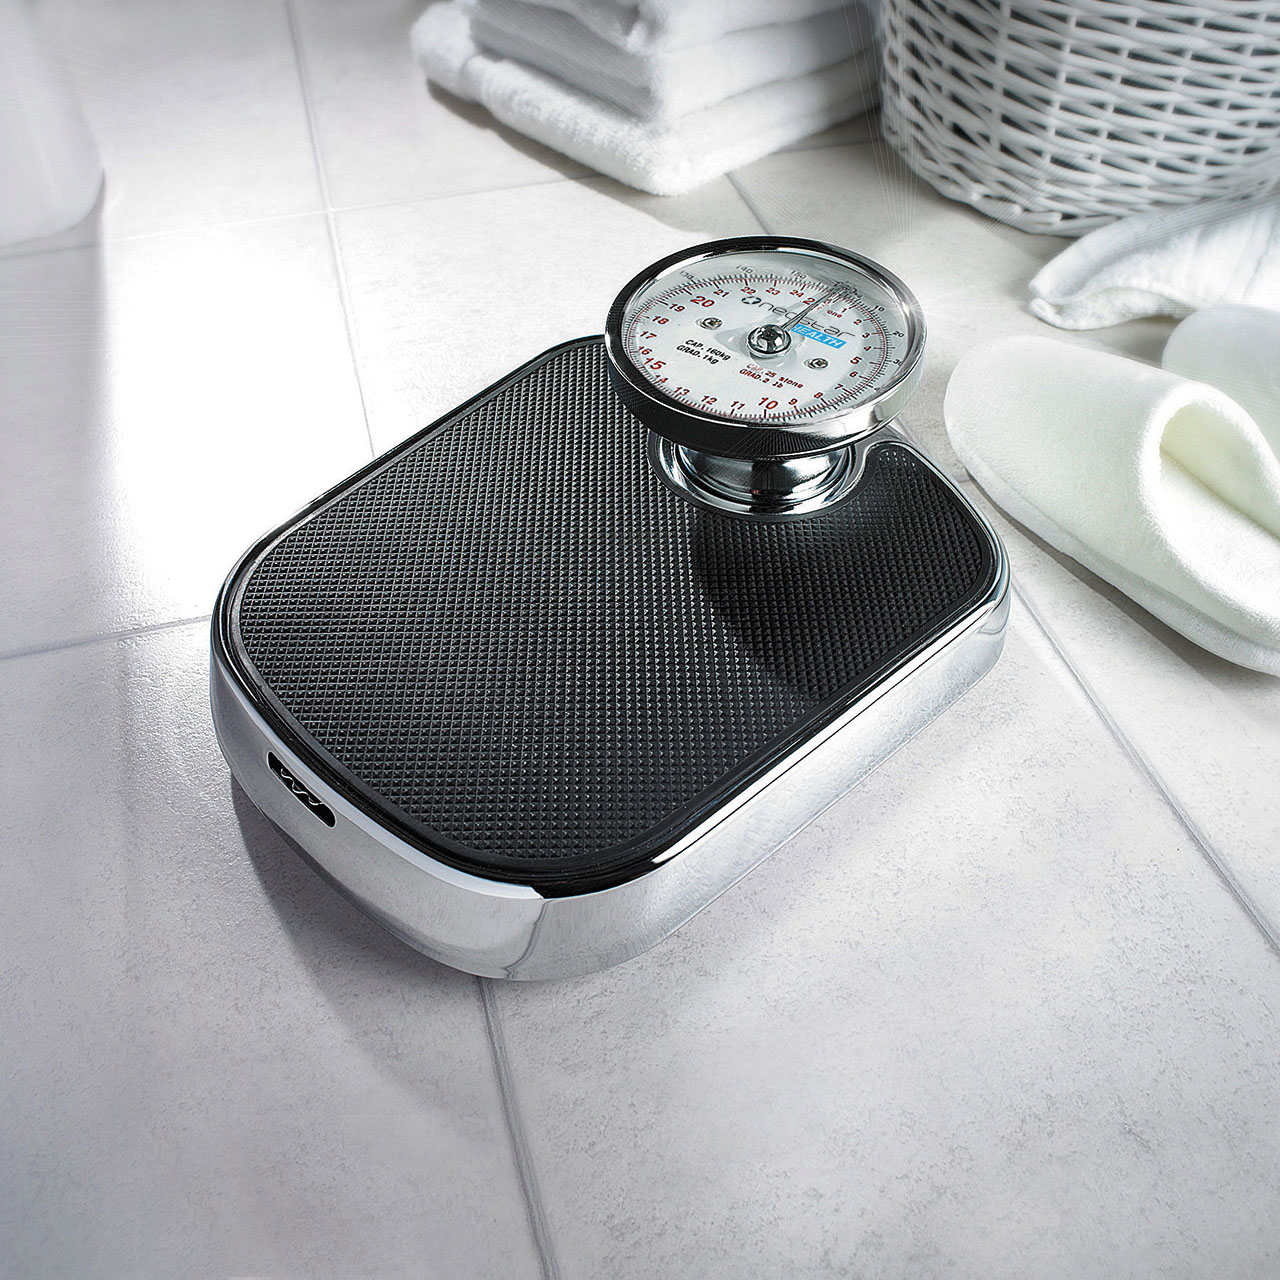 Neostar® Traditional Bathroom Scales